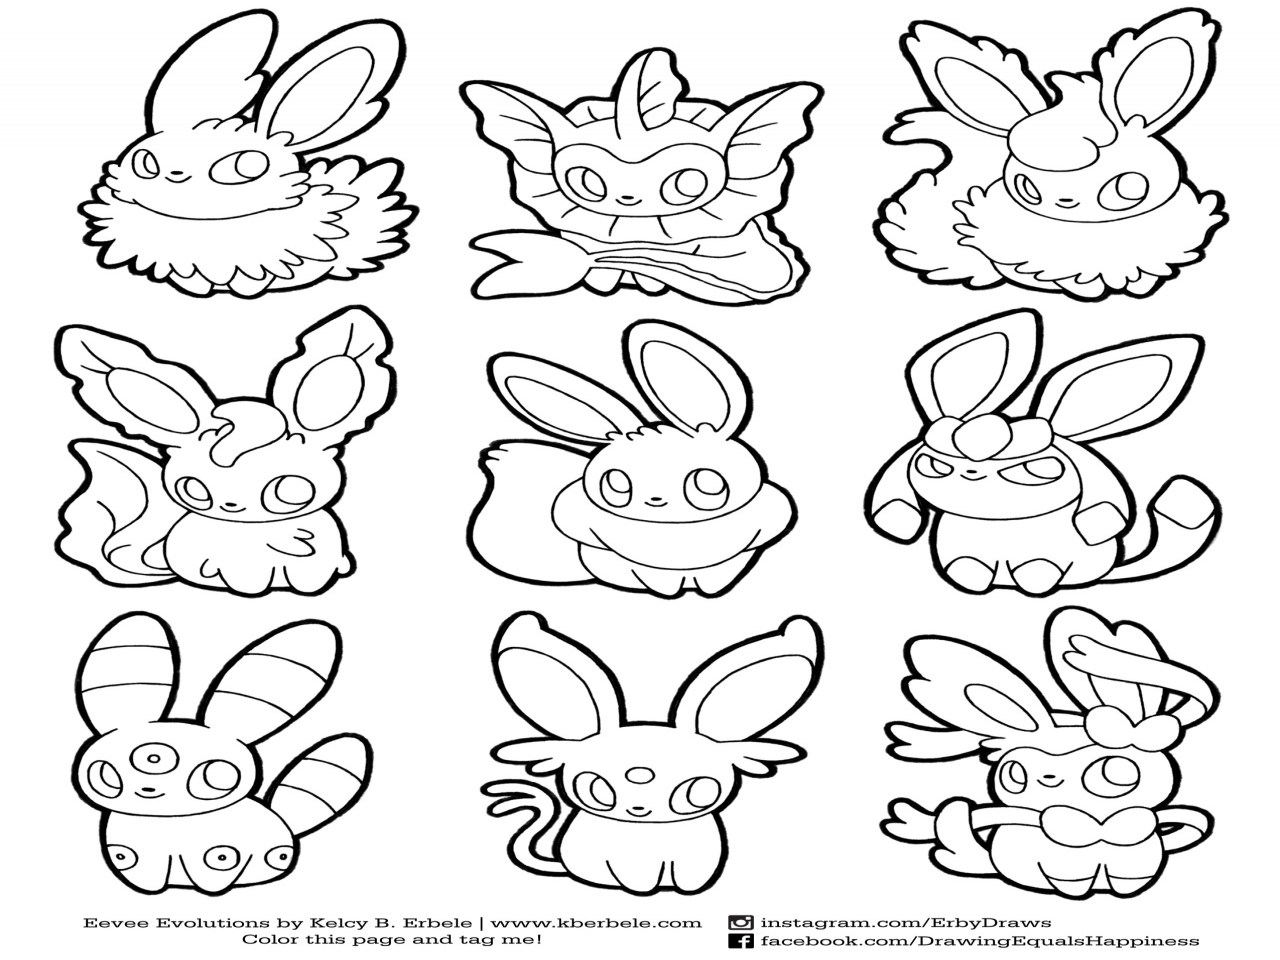 eeveelutions-coloring-pages-at-getdrawings-free-download